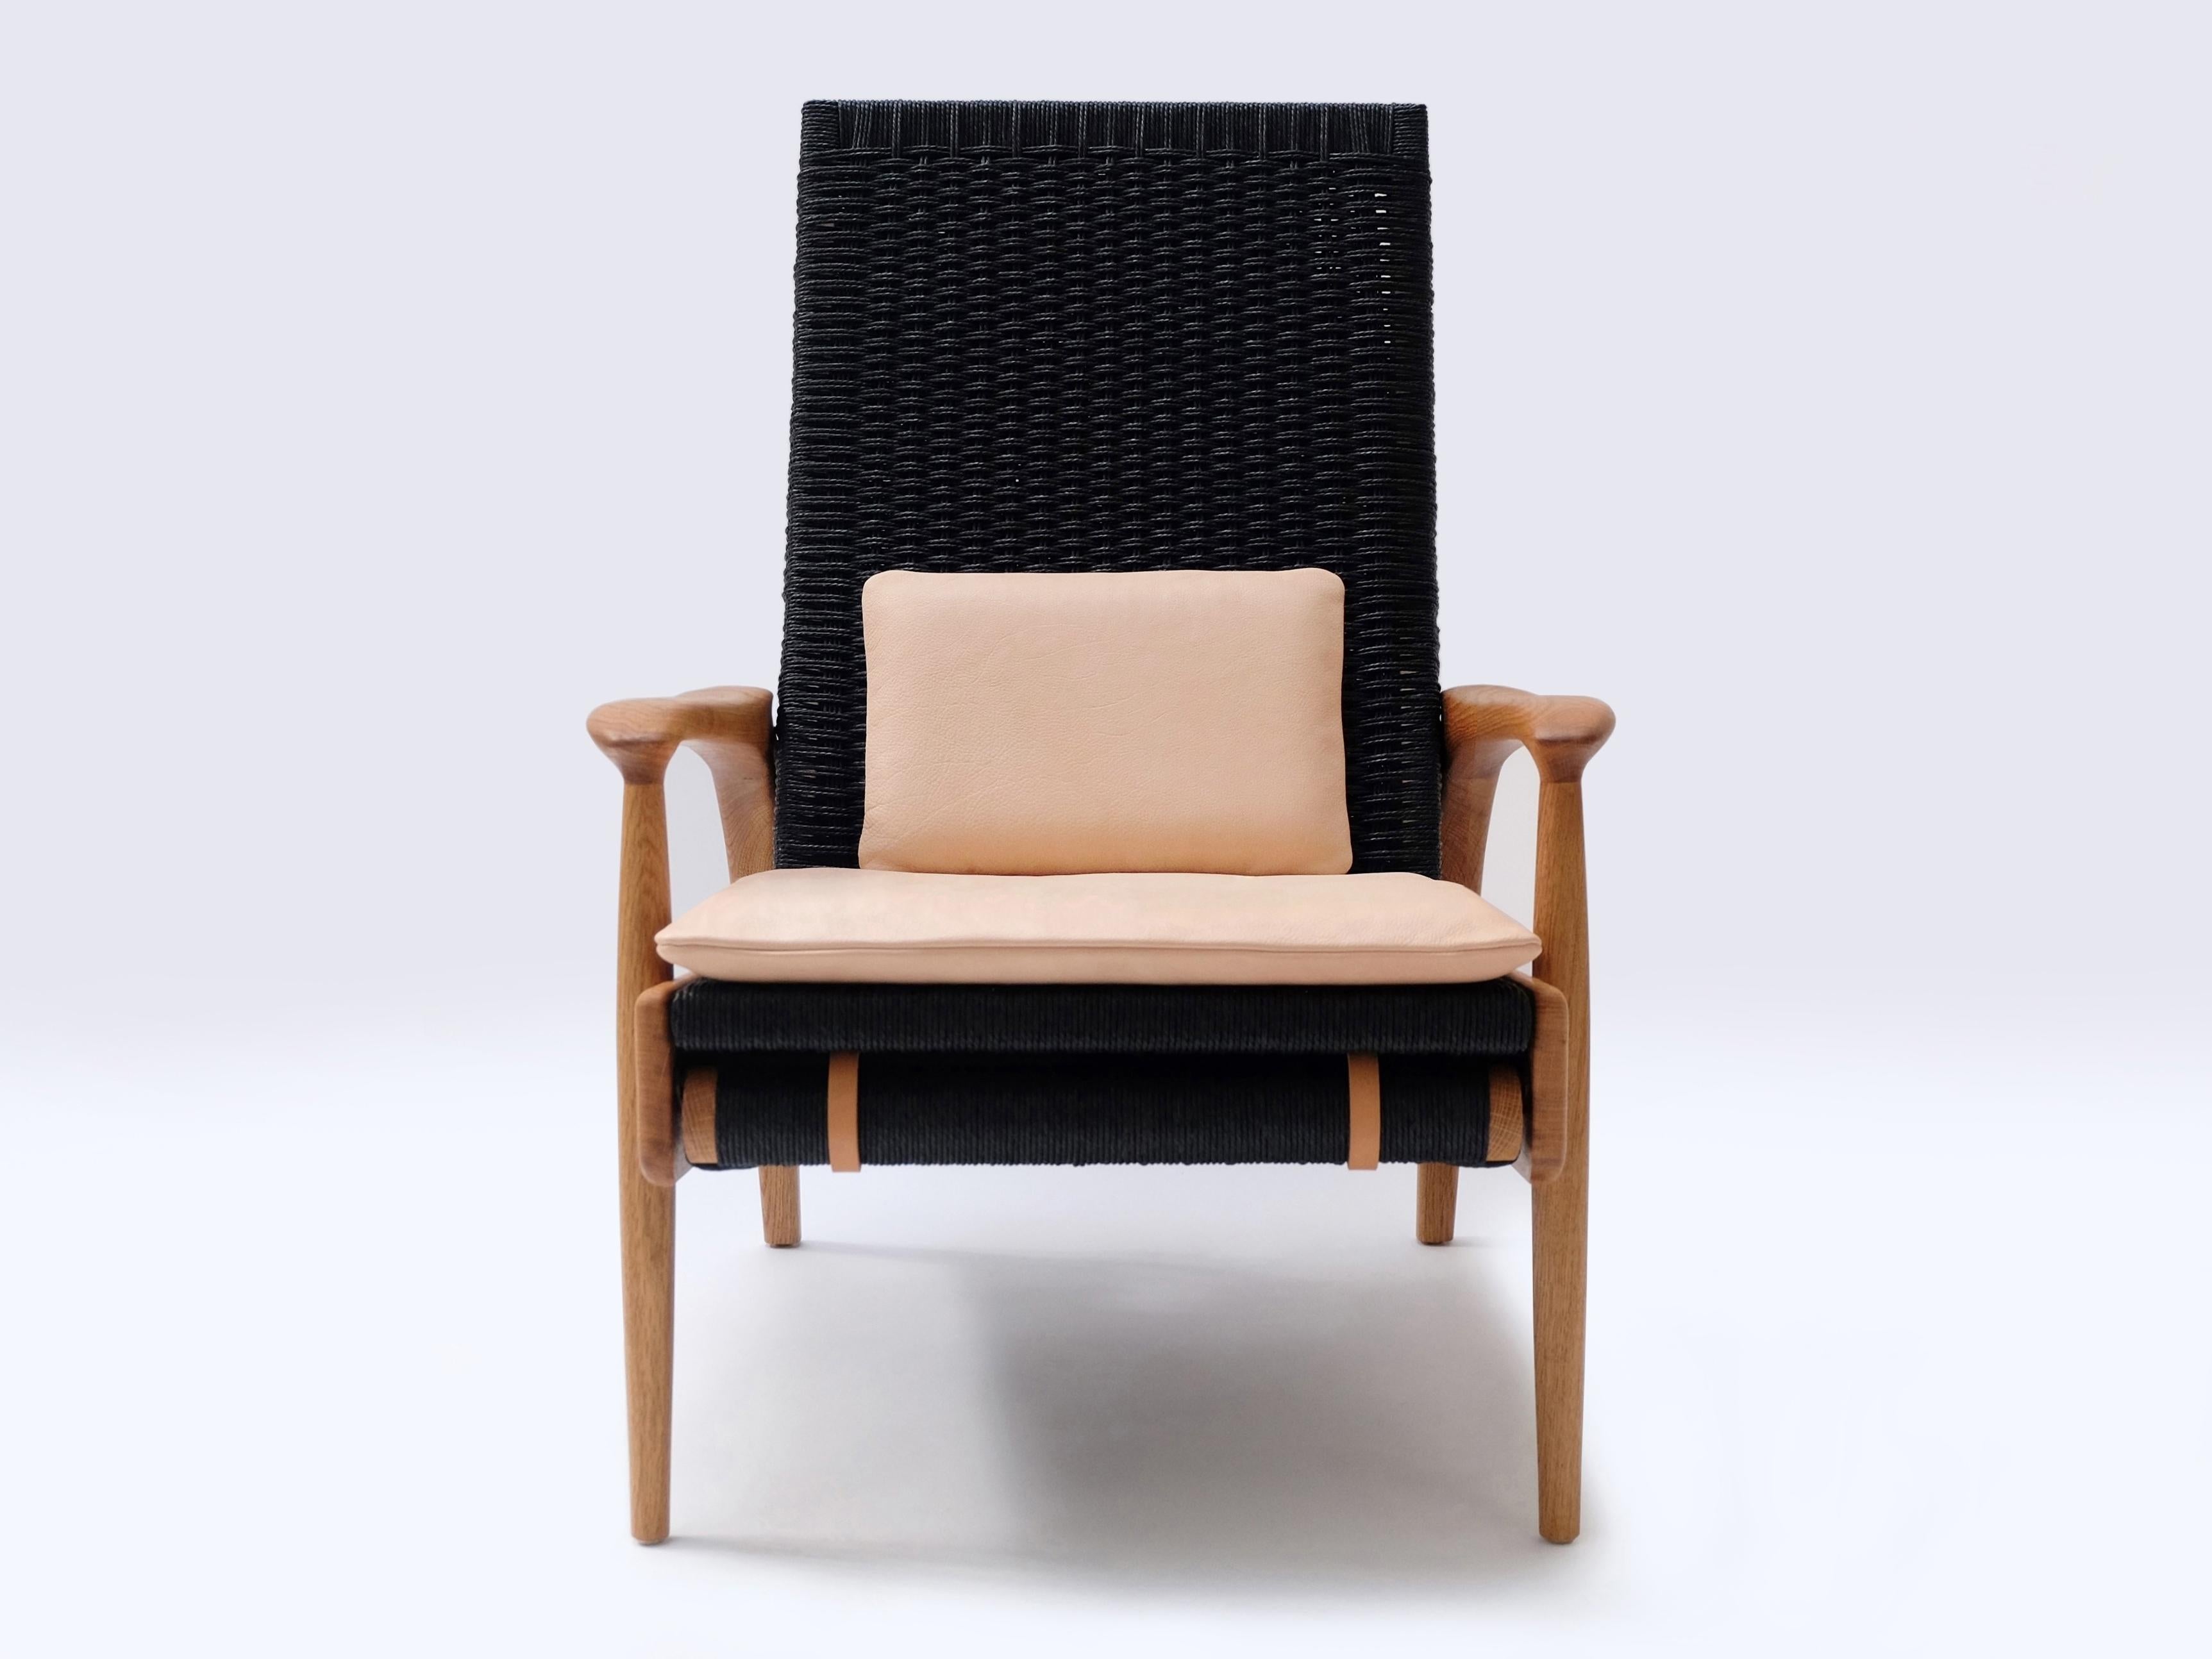 Custom-Made Handcrafted Reclining Lounge Chair in Oiled Oak& Black Danish Cord For Sale 3